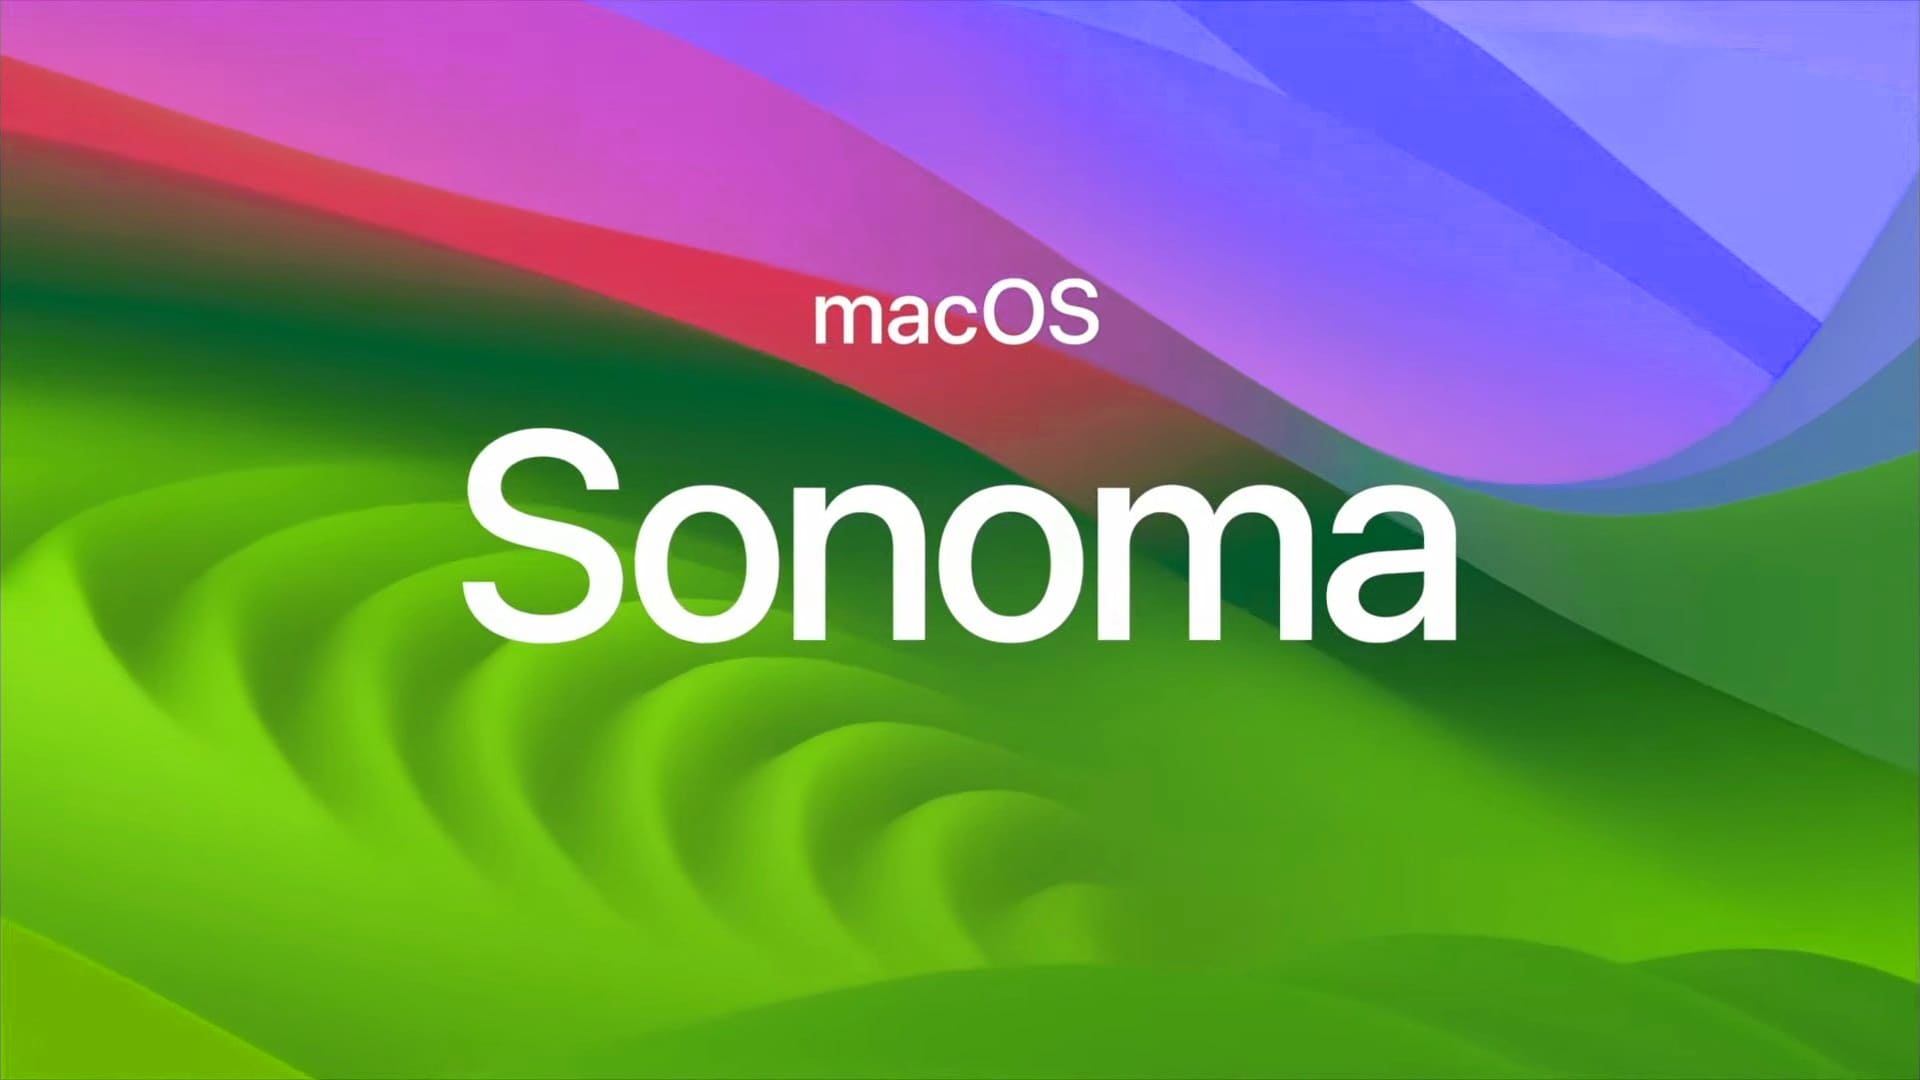 MacOS Sonoma Wallpapers